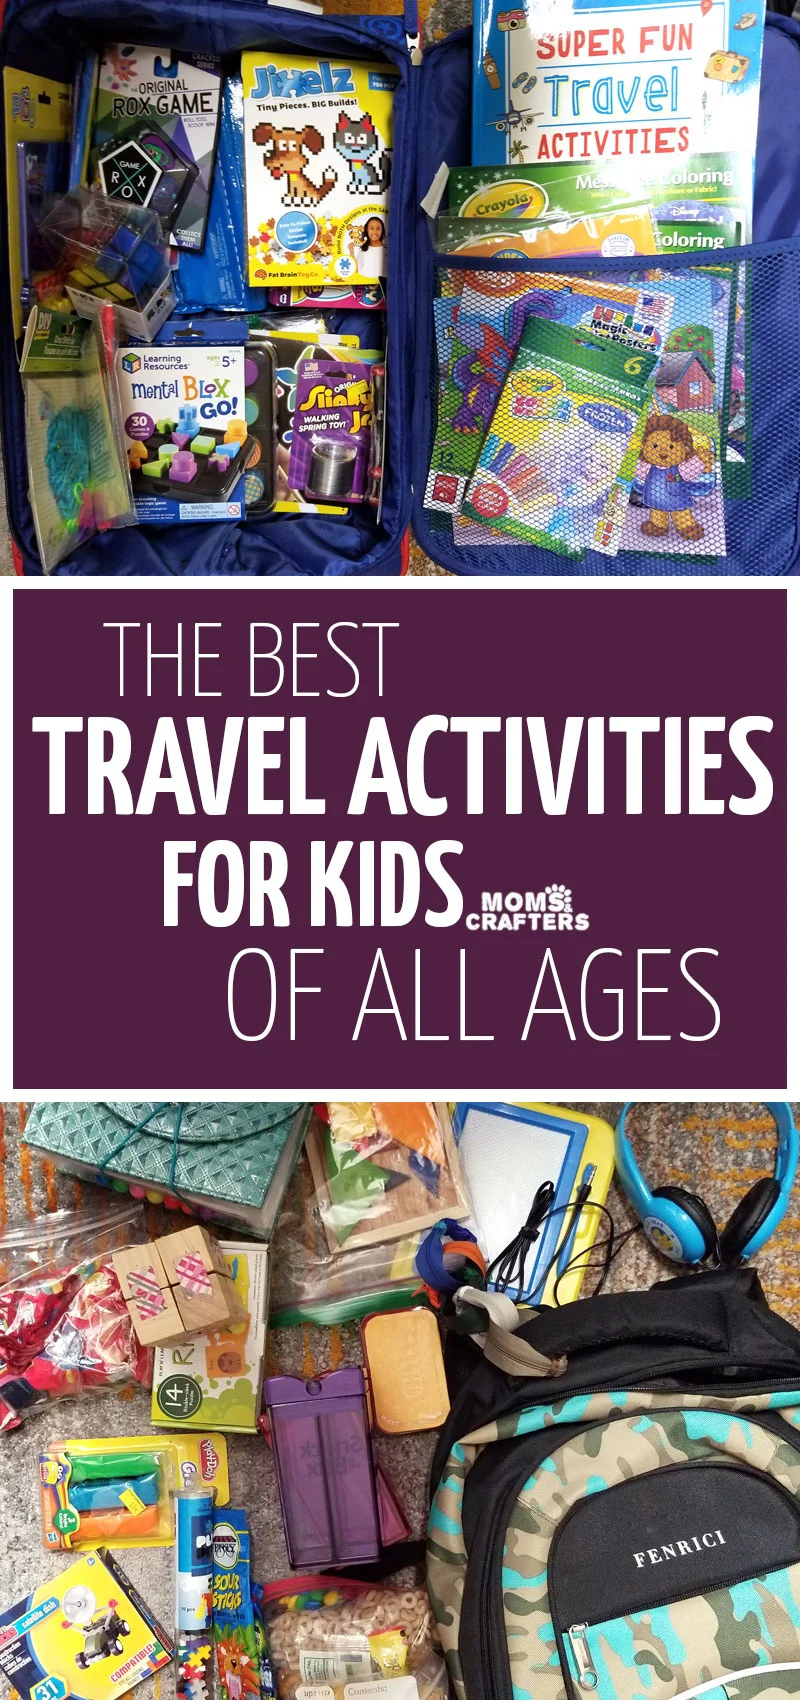 CLick for the ultimate list of airplane activities for kids of all ages! These cool travel activities for preschoolers and grade school age kids include fun ideas for long flights, cool travel toys and crafts, and more!